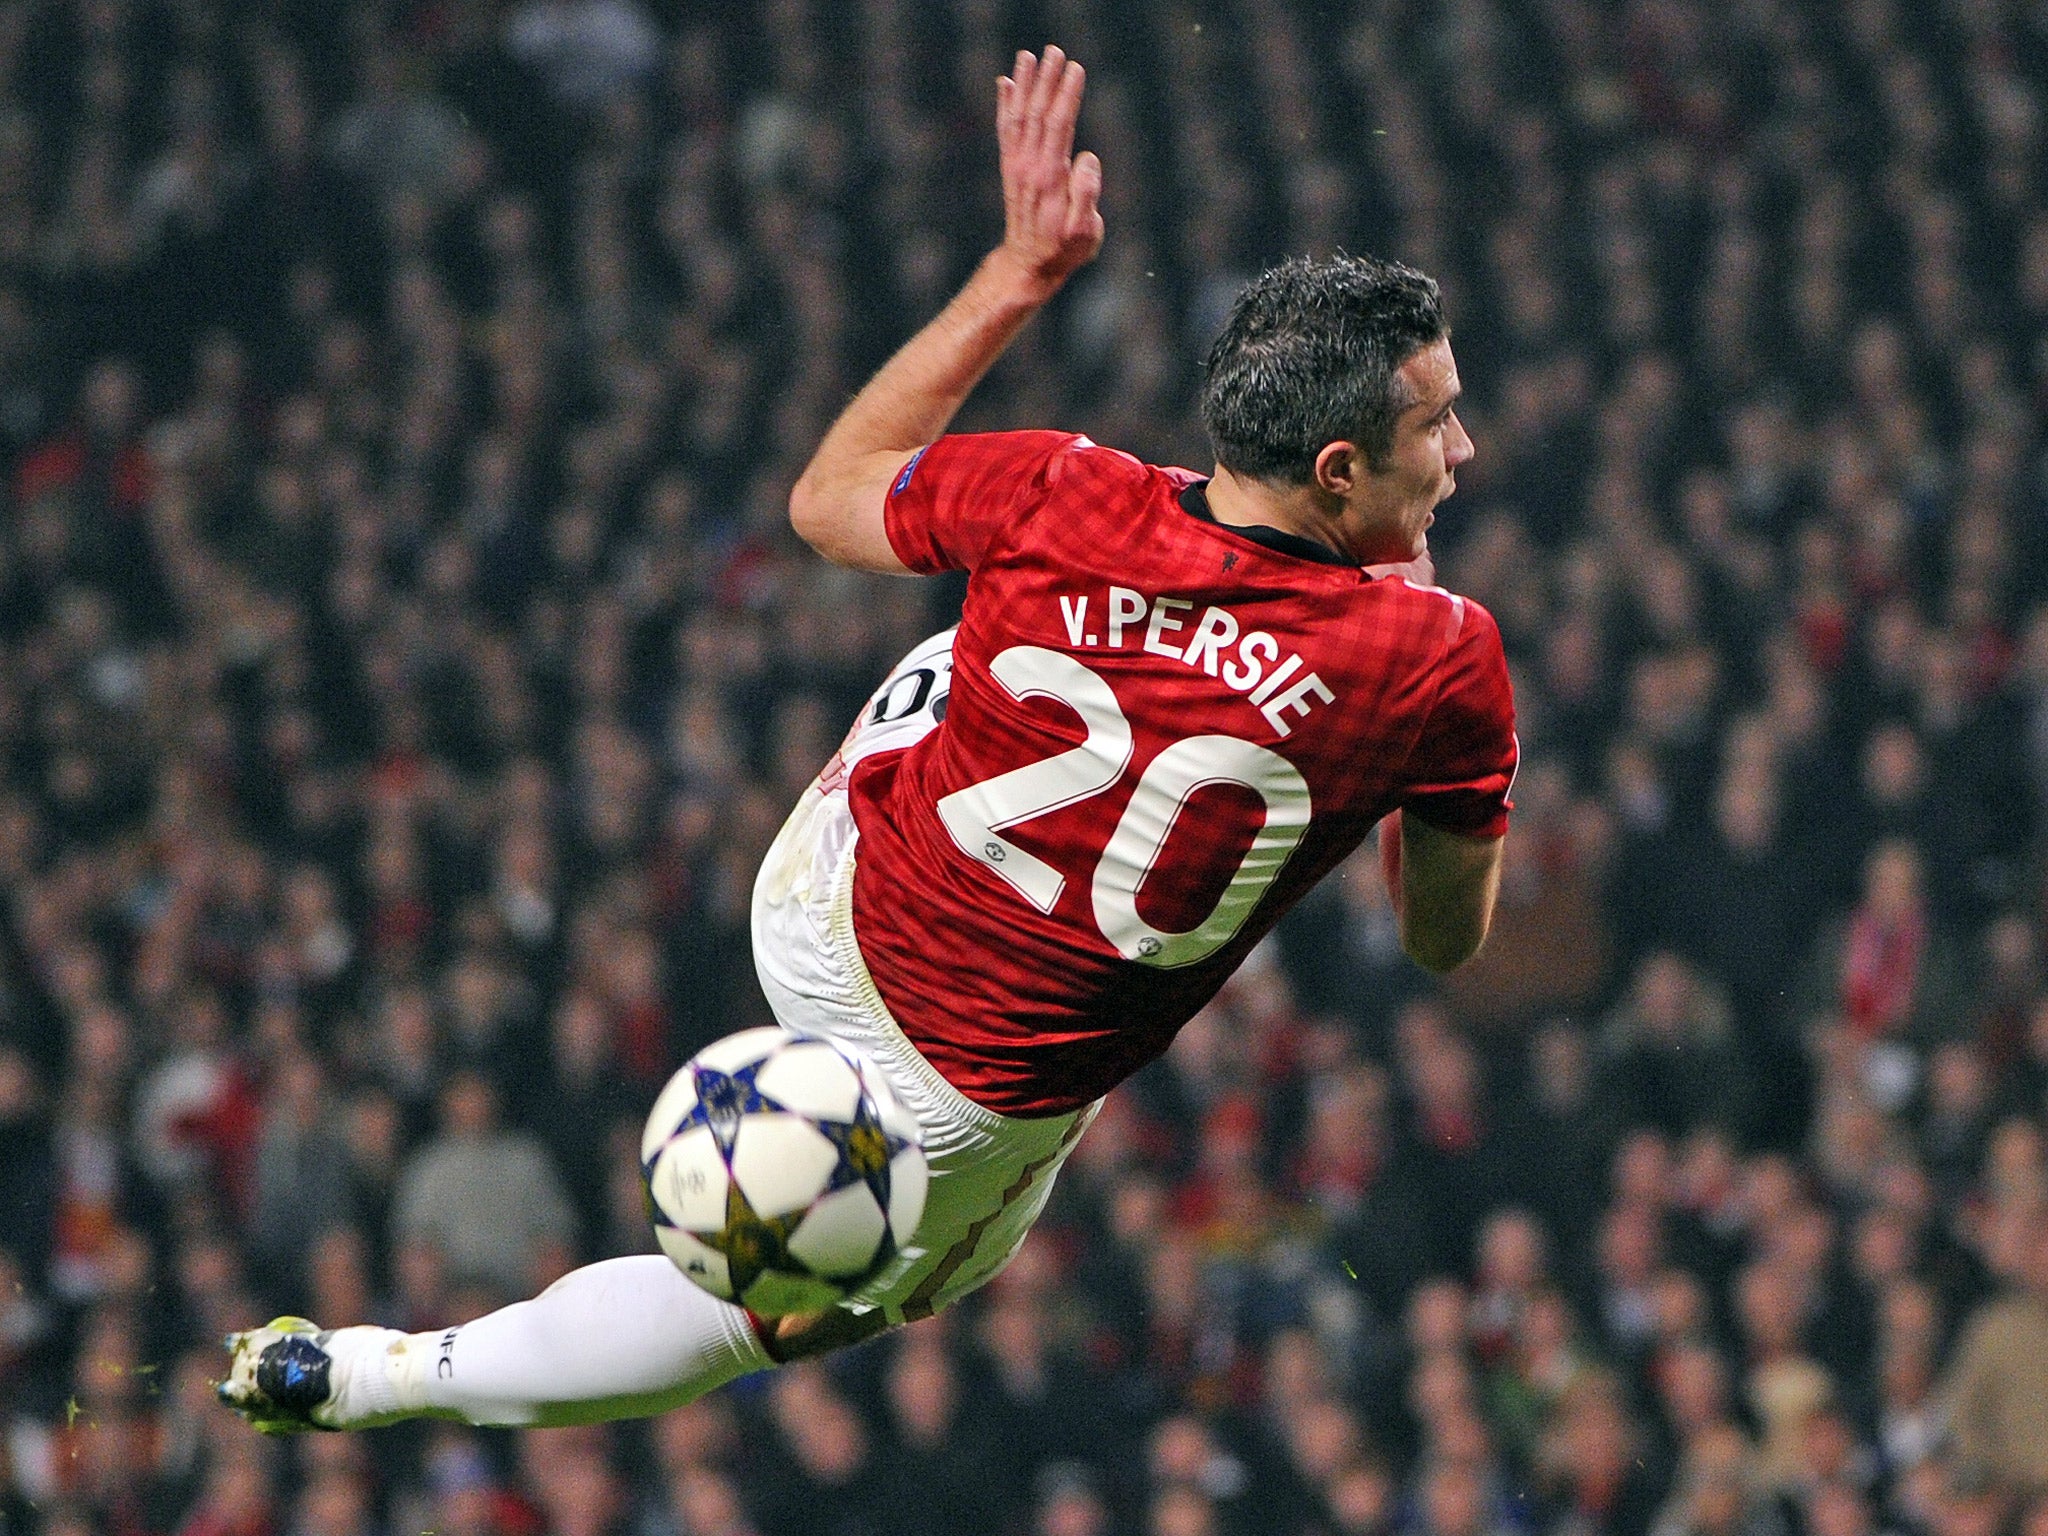 ROBIN VAN PERSIE: Scourge of Premier League defences, he found Ramos and Varane tough. Forced two easy saves from Lopez. 6